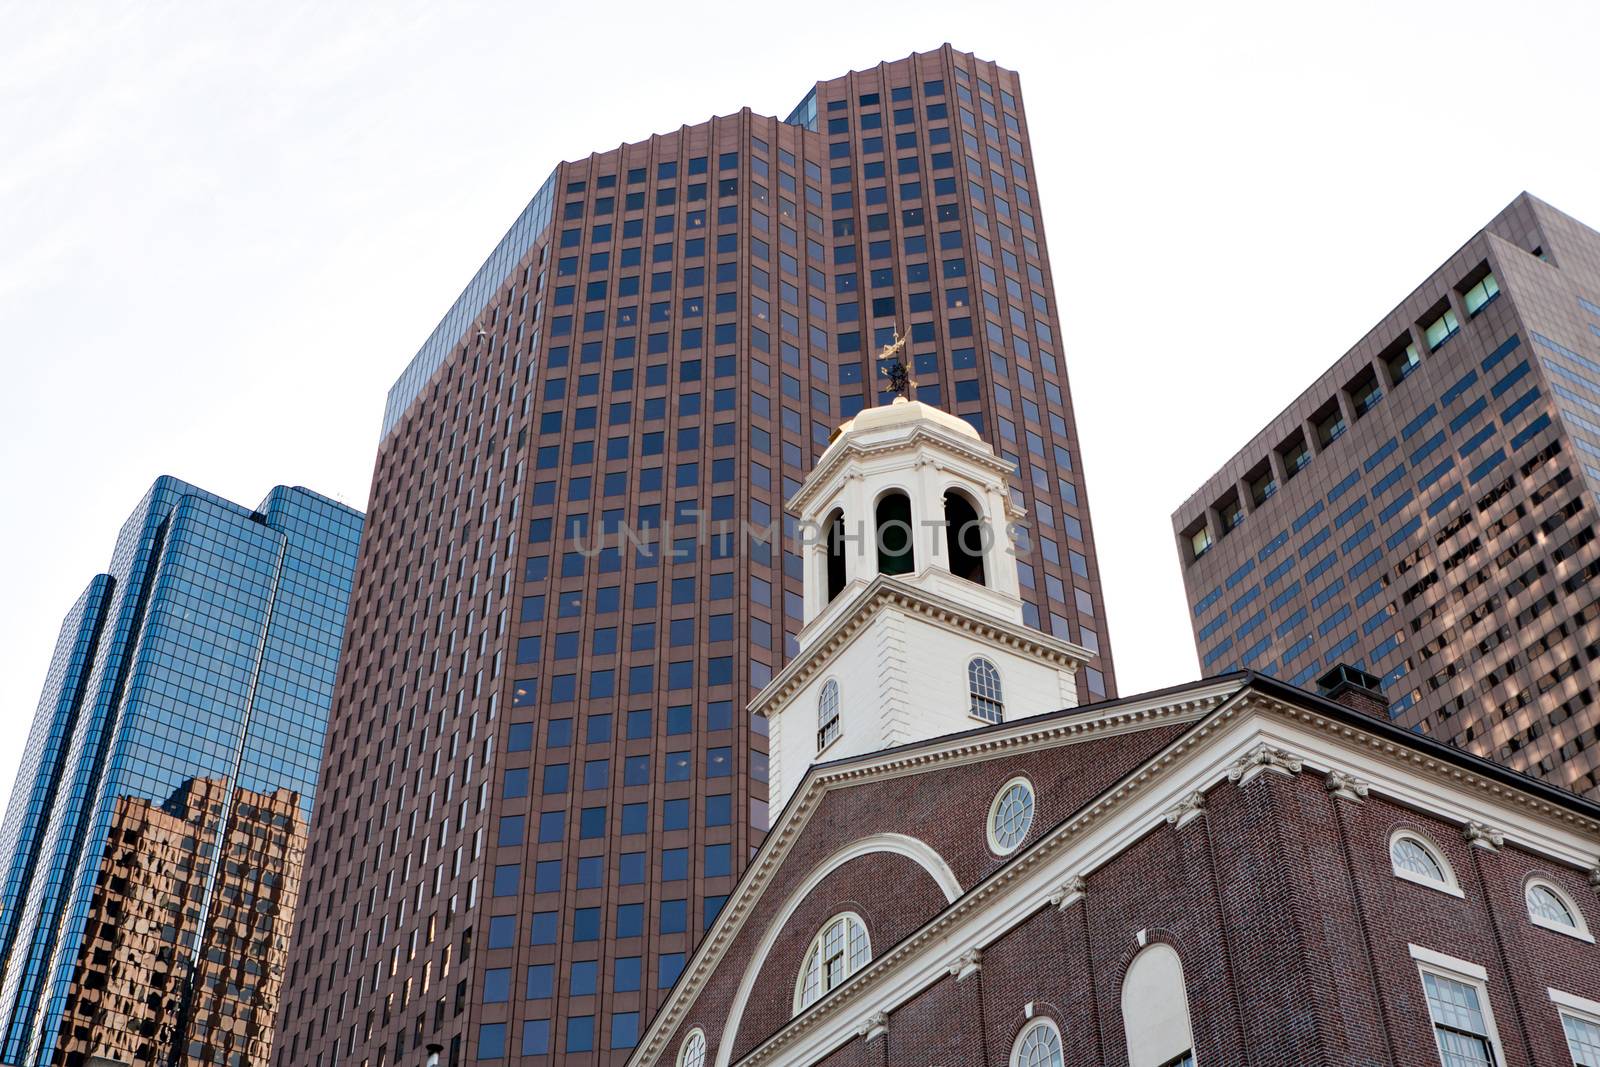 Boston Faneuil Hall by graficallyminded